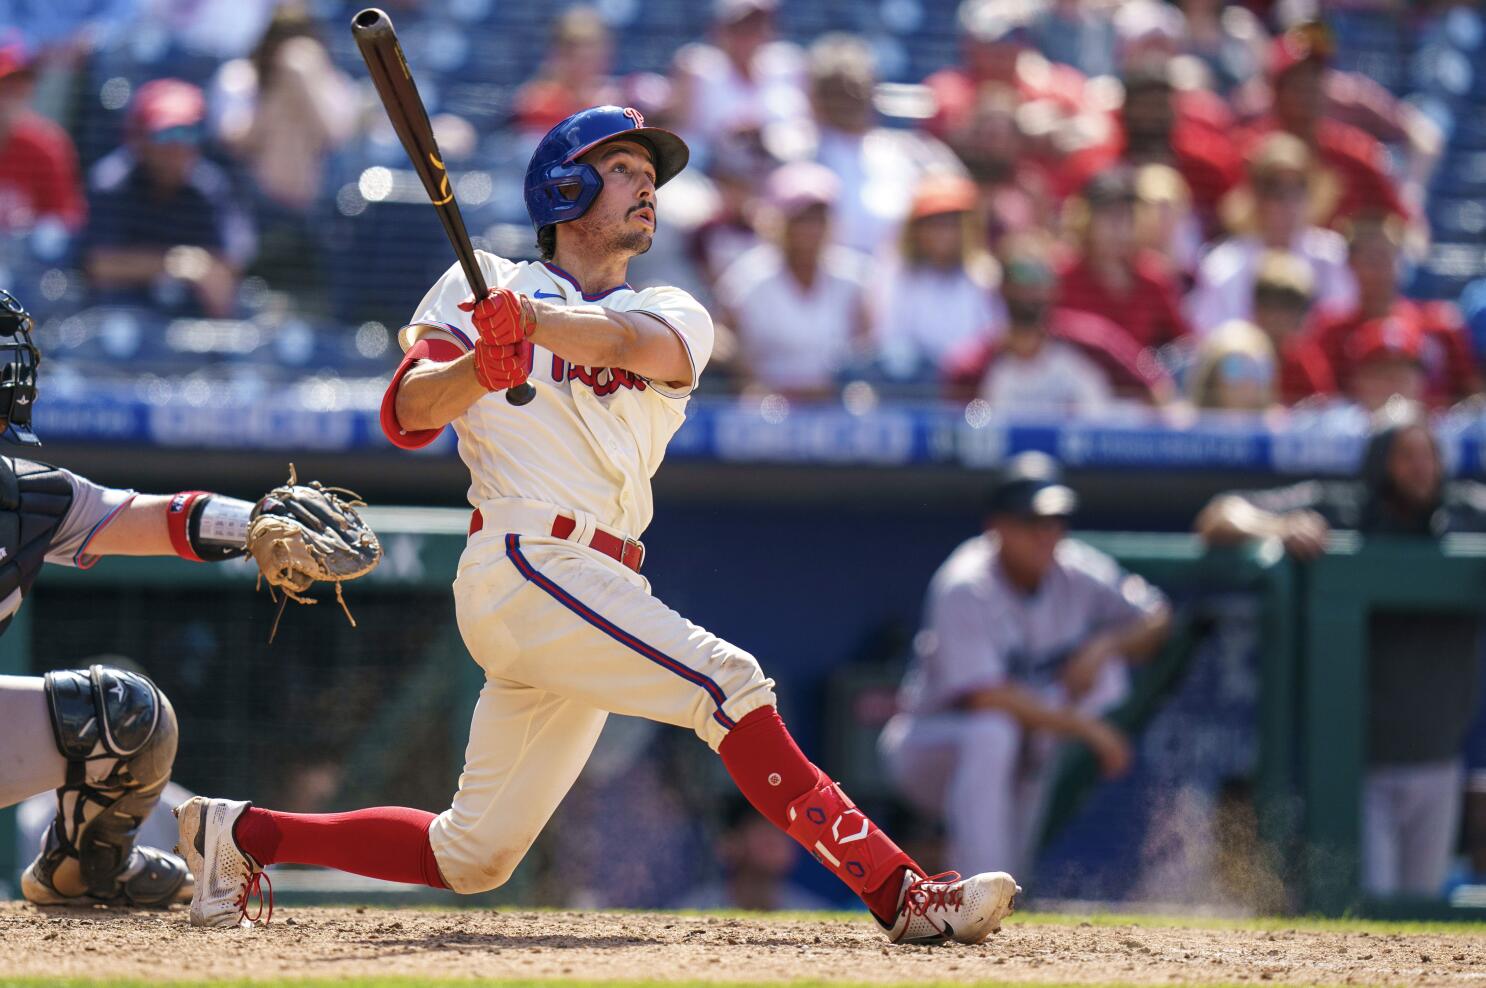 Phillies bats, led by Bryce Harper, rally against Marlins late for 3-1 win